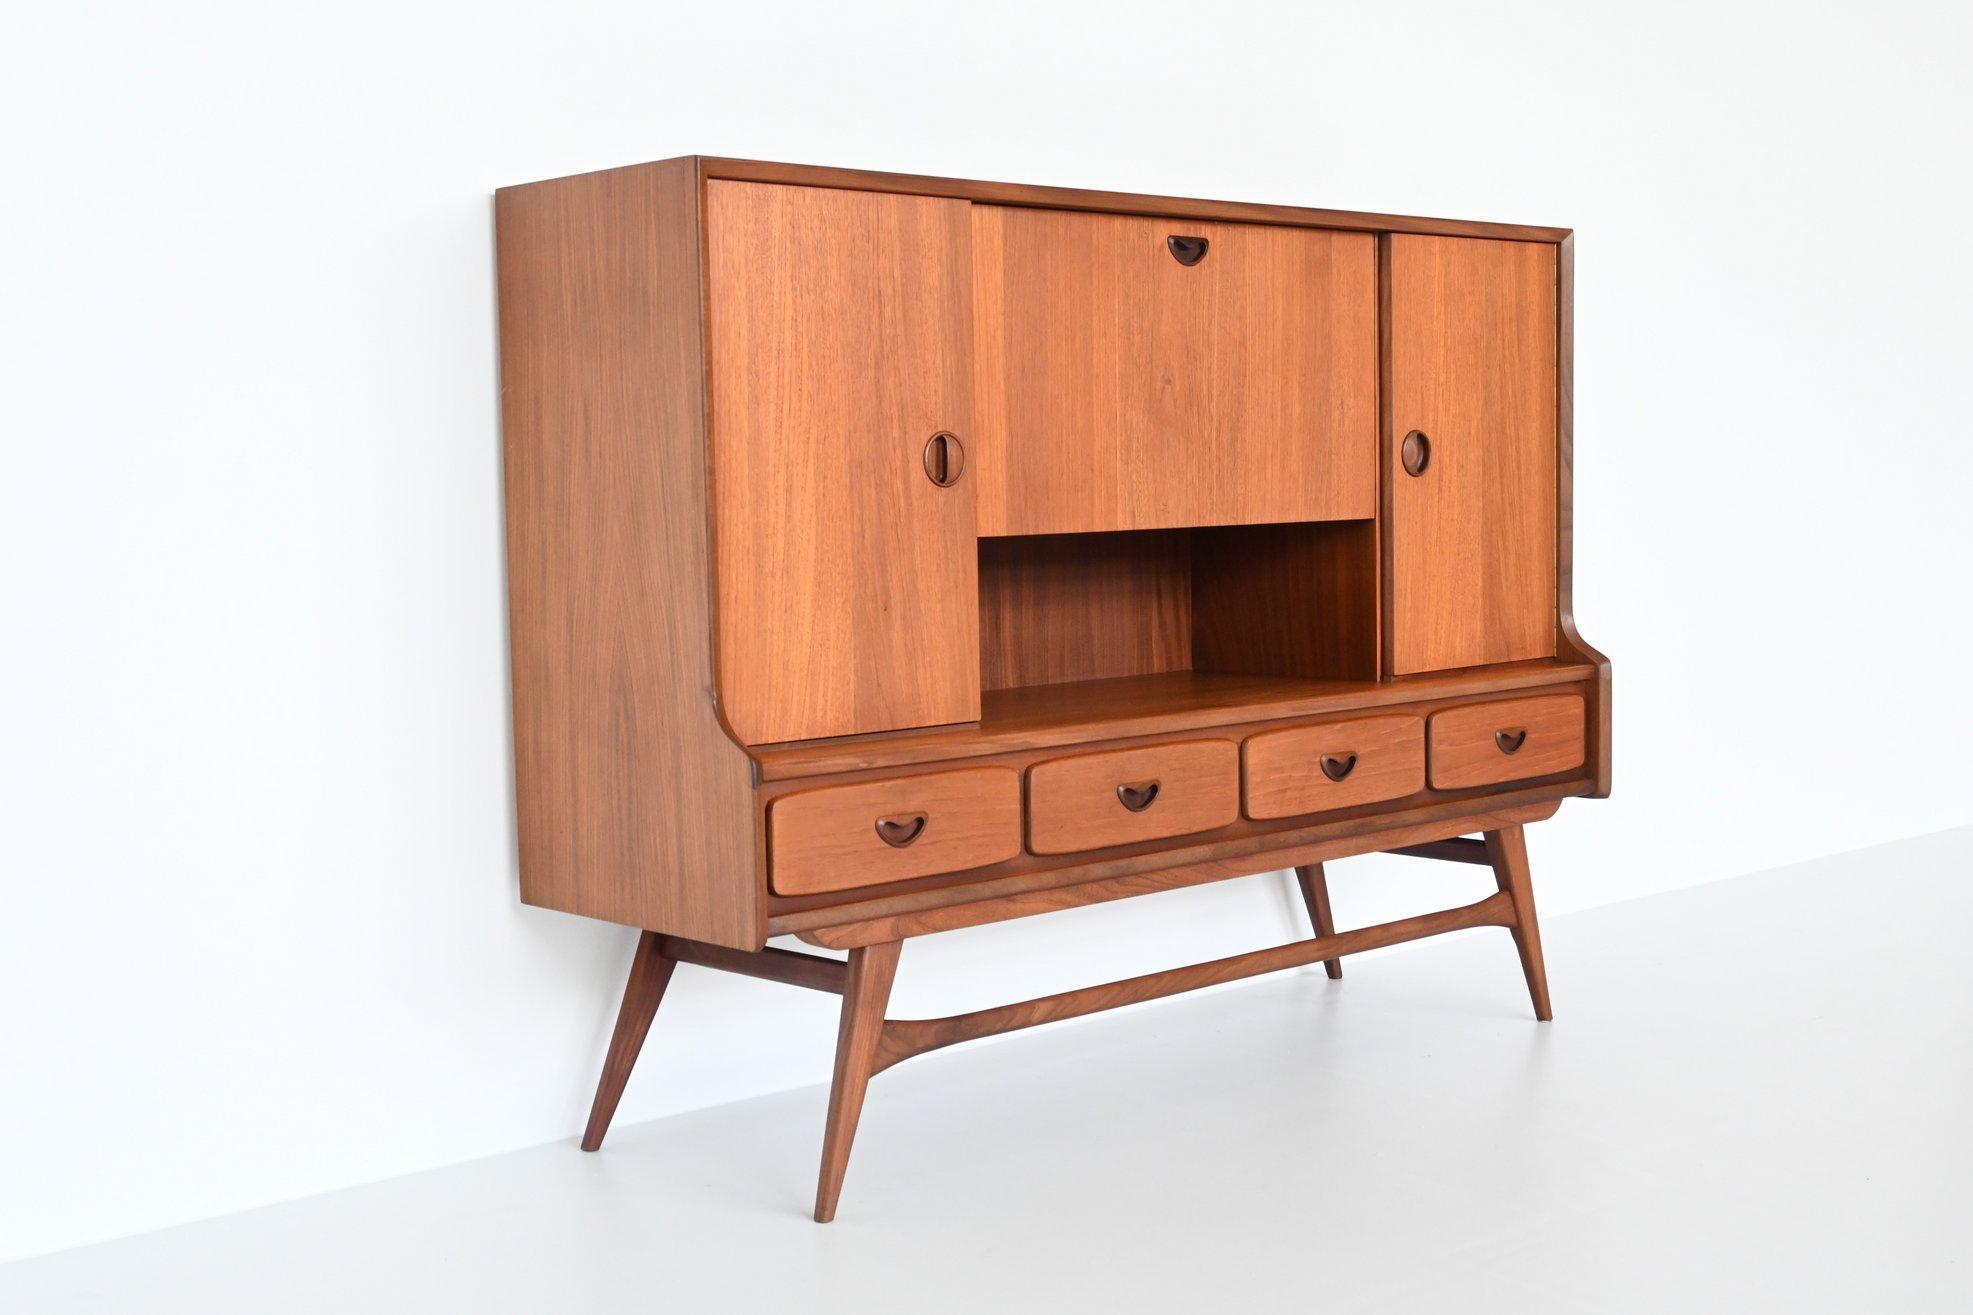 Beautiful symmetric highboard designed by Louis van Teeffelen and manufactured by Webe Meubelen, The Netherlands 1960. This very nice organic shaped cabinet is made of teak wood. Some very nice details are the well-crafted handles and beautiful